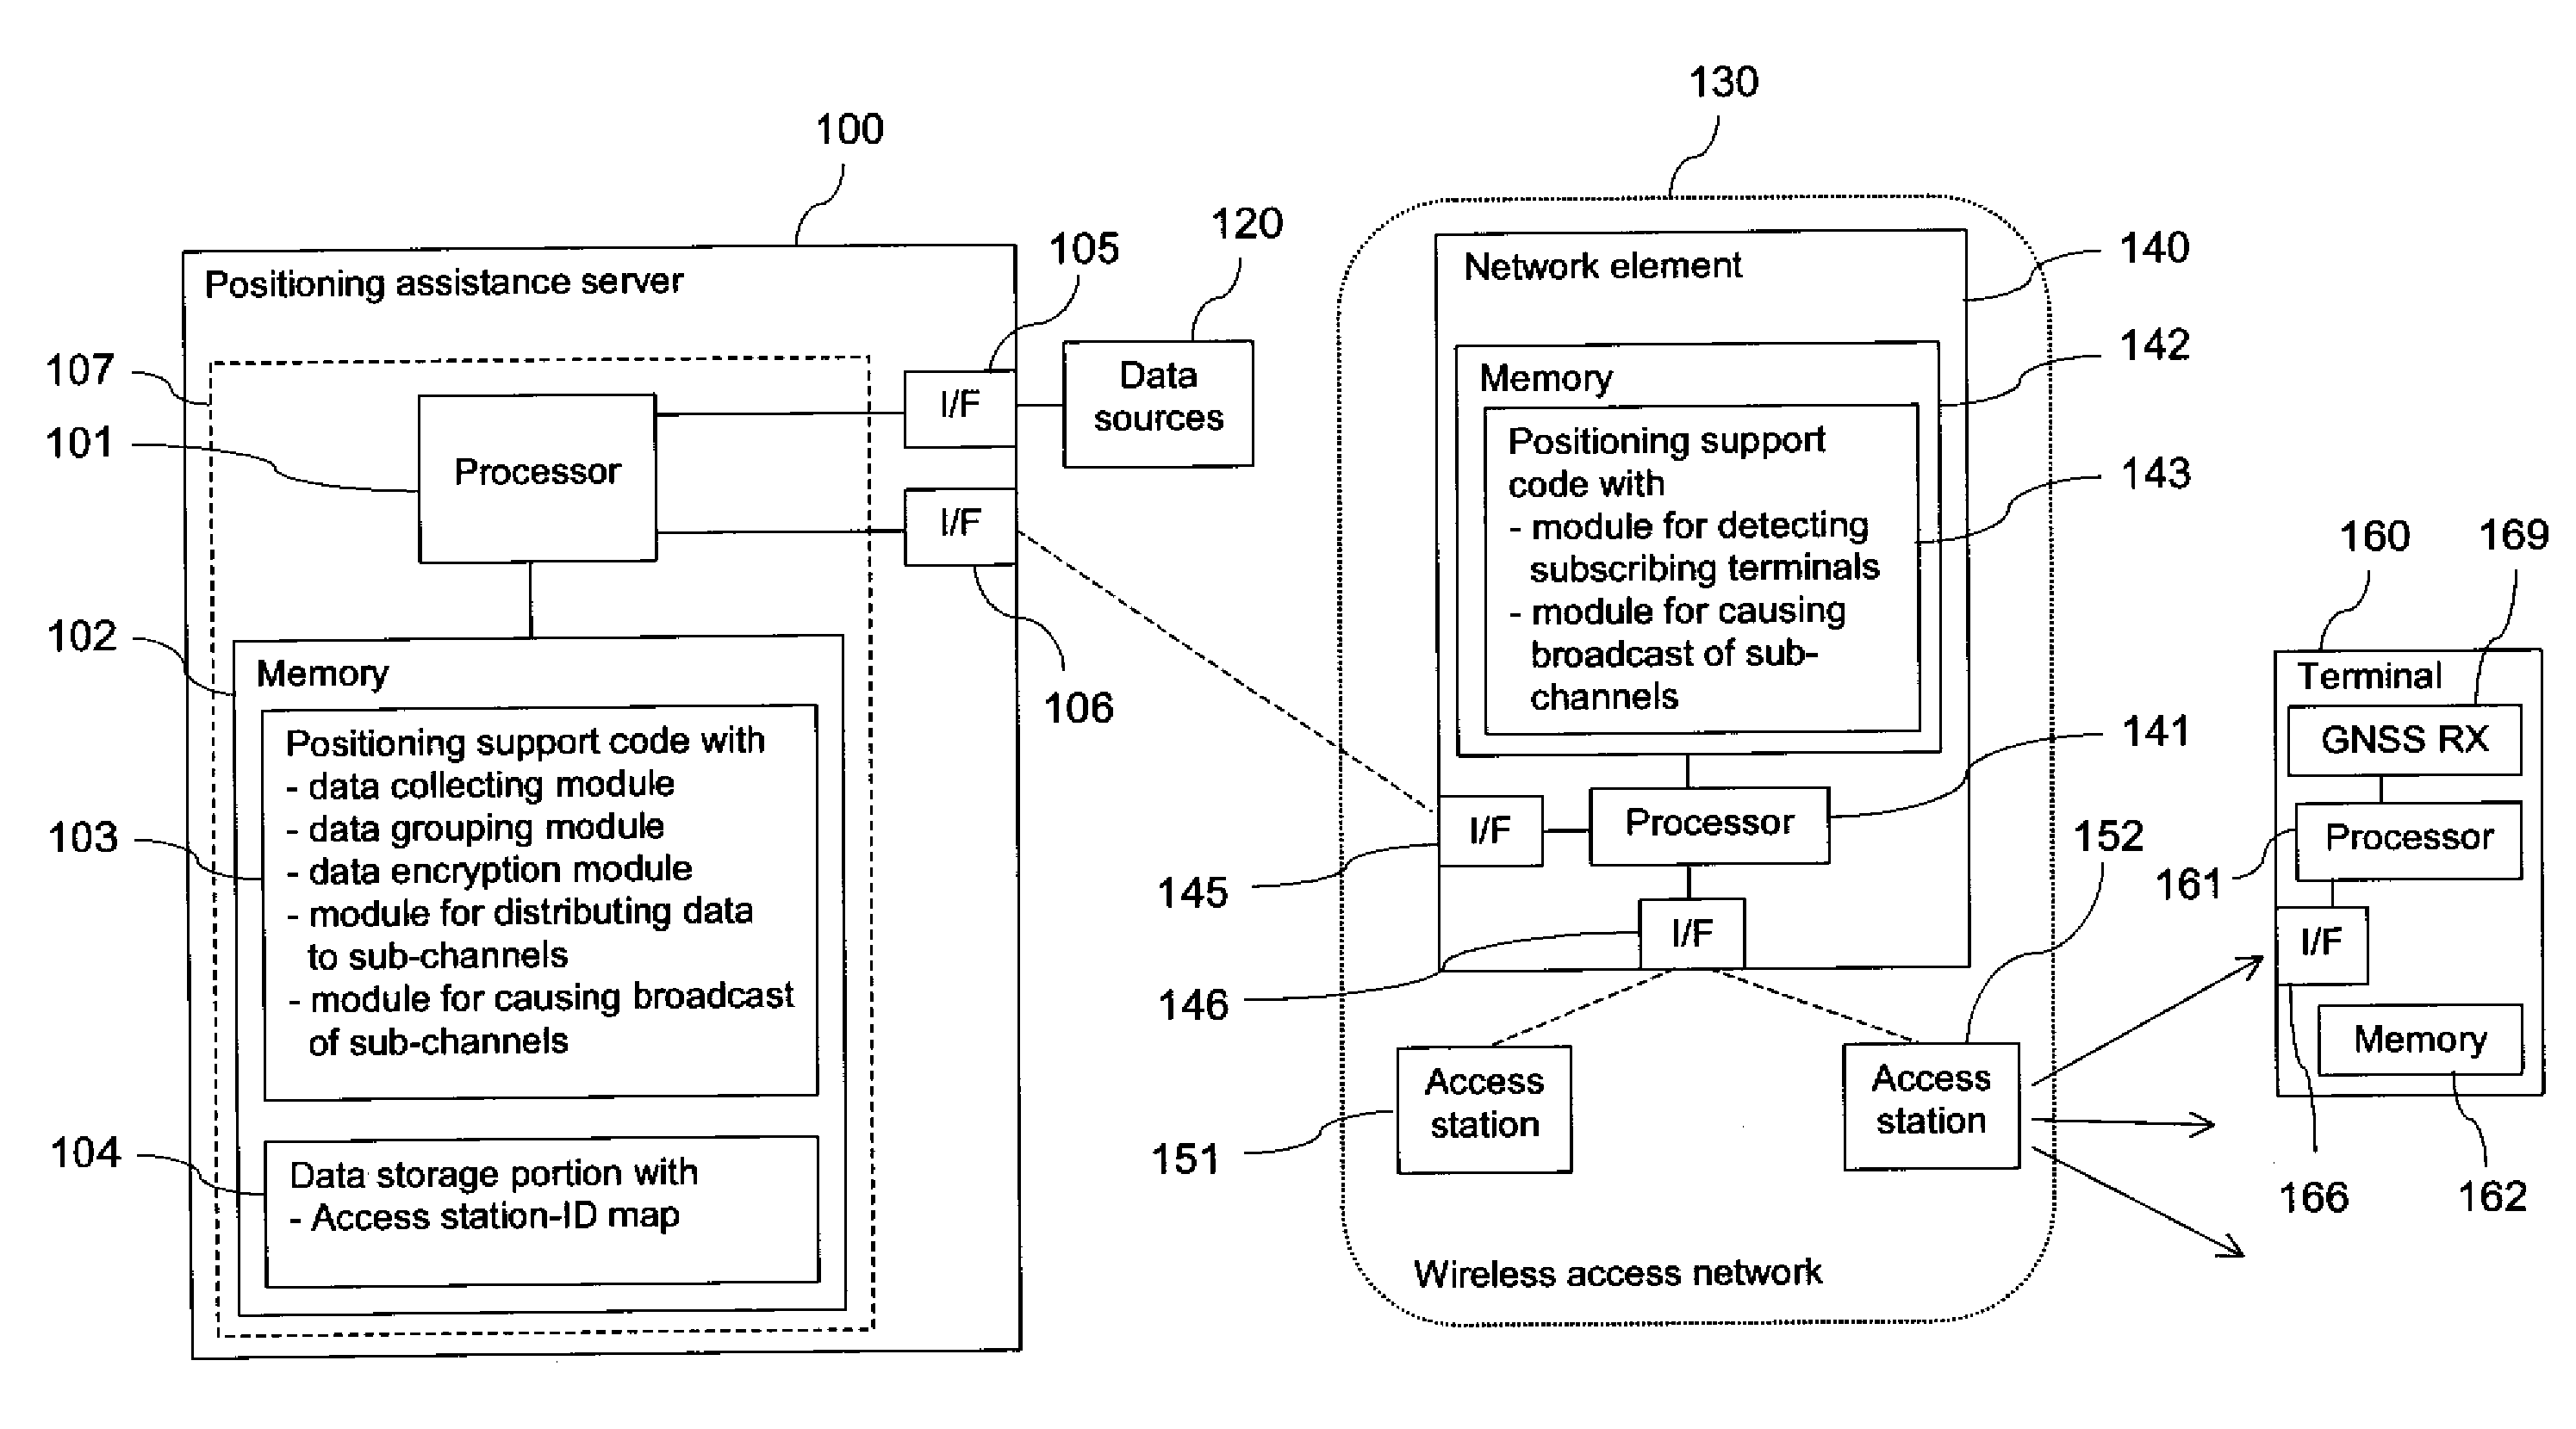 Providing positioning assistance data